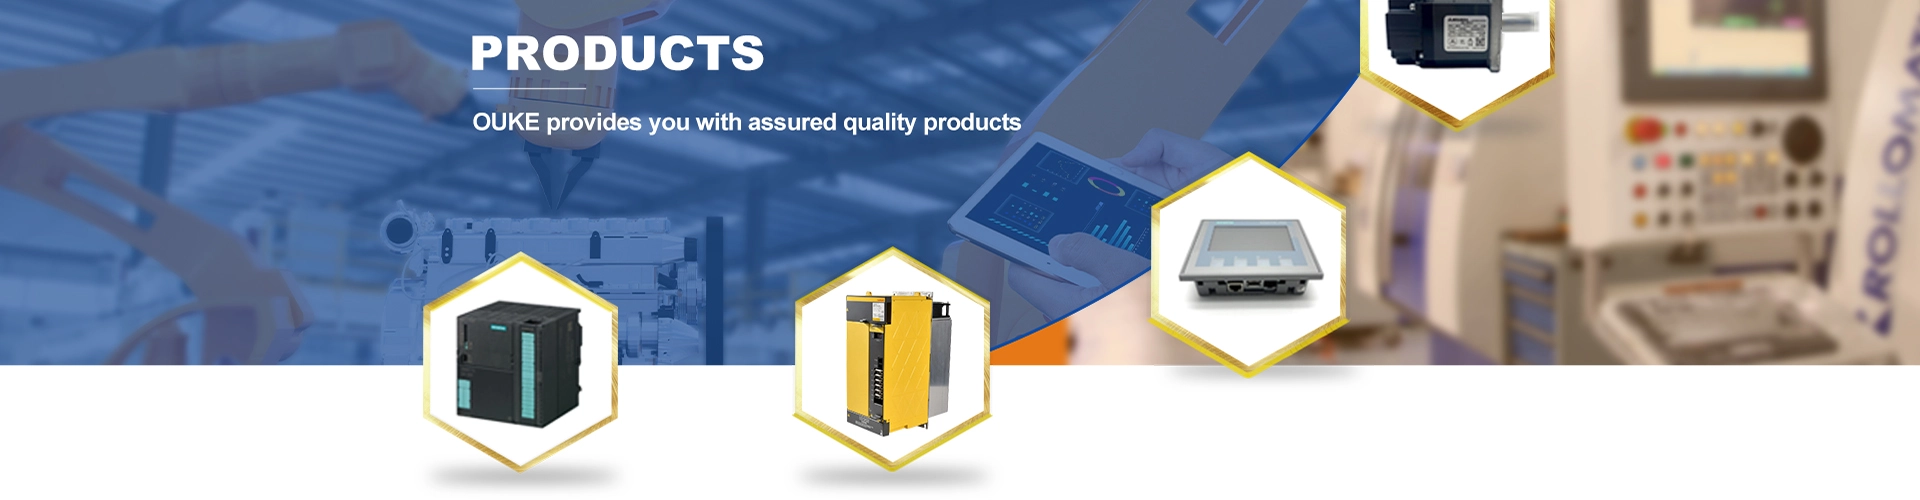 Industrial Automation Products From Other Brands